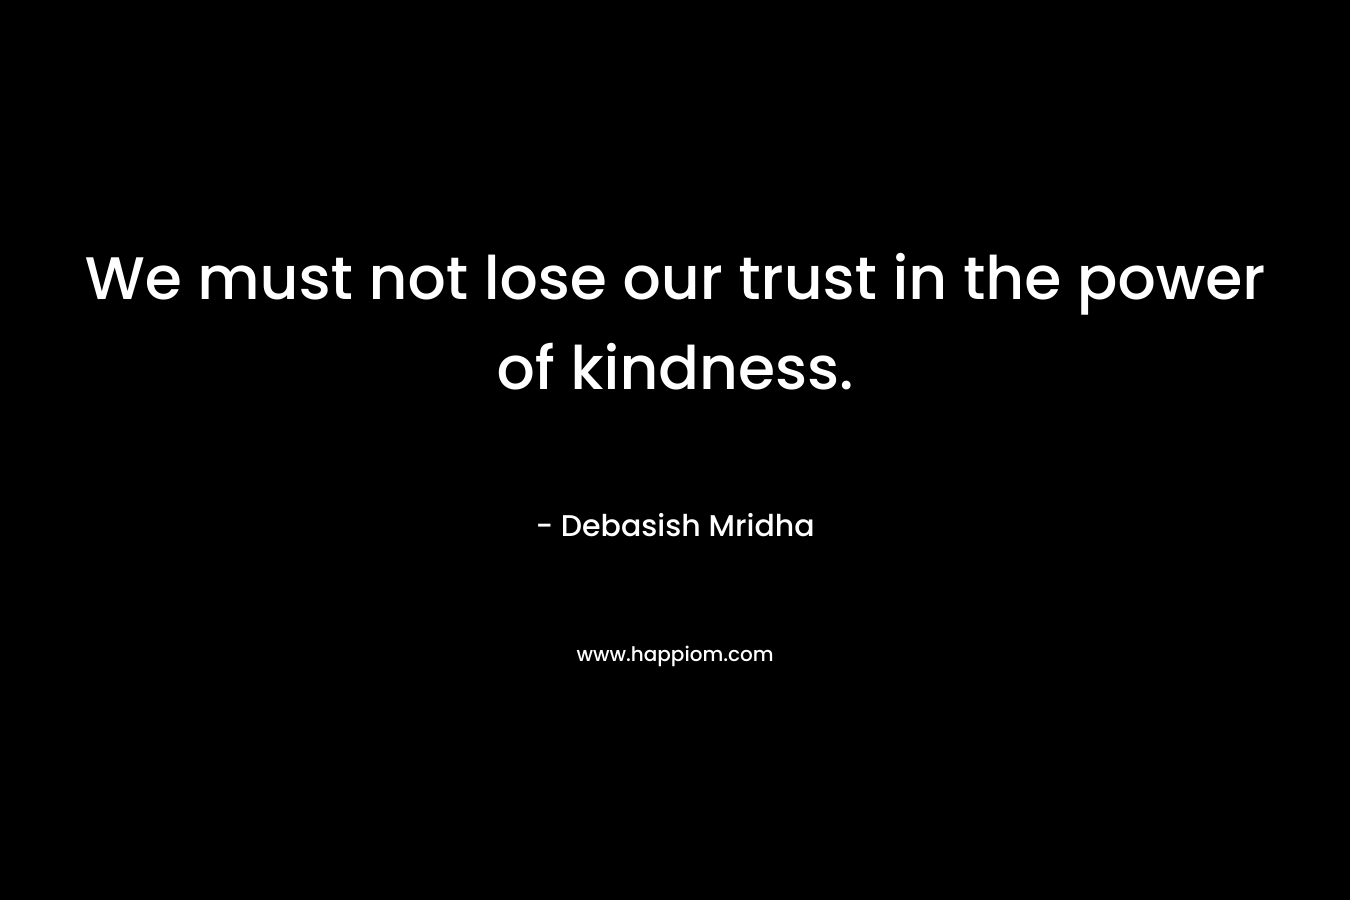 We must not lose our trust in the power of kindness.